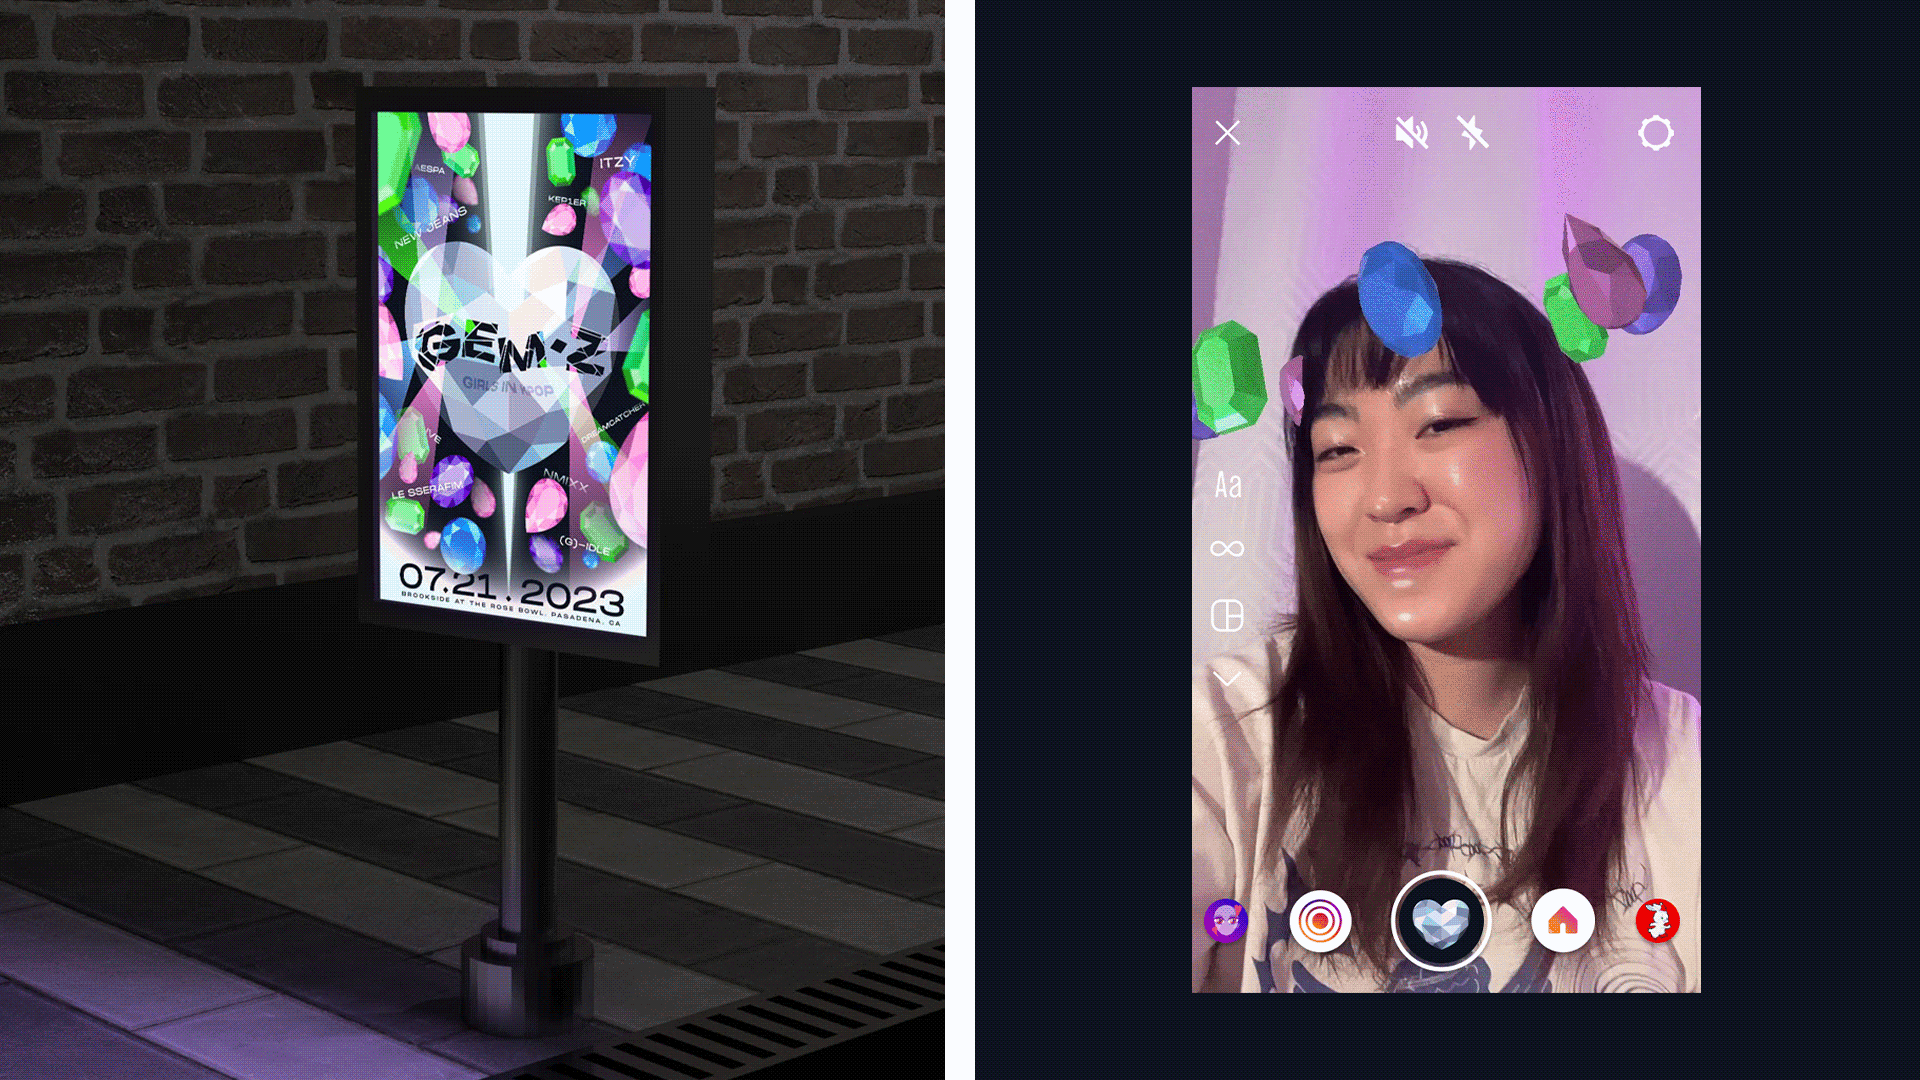 Two separate gifs. Left gif includes branding collateral such as the hero poster, wristbands, and website landing page. Right gif includes a demo of an AR face filter of floating gemstones circling around the person’s head.